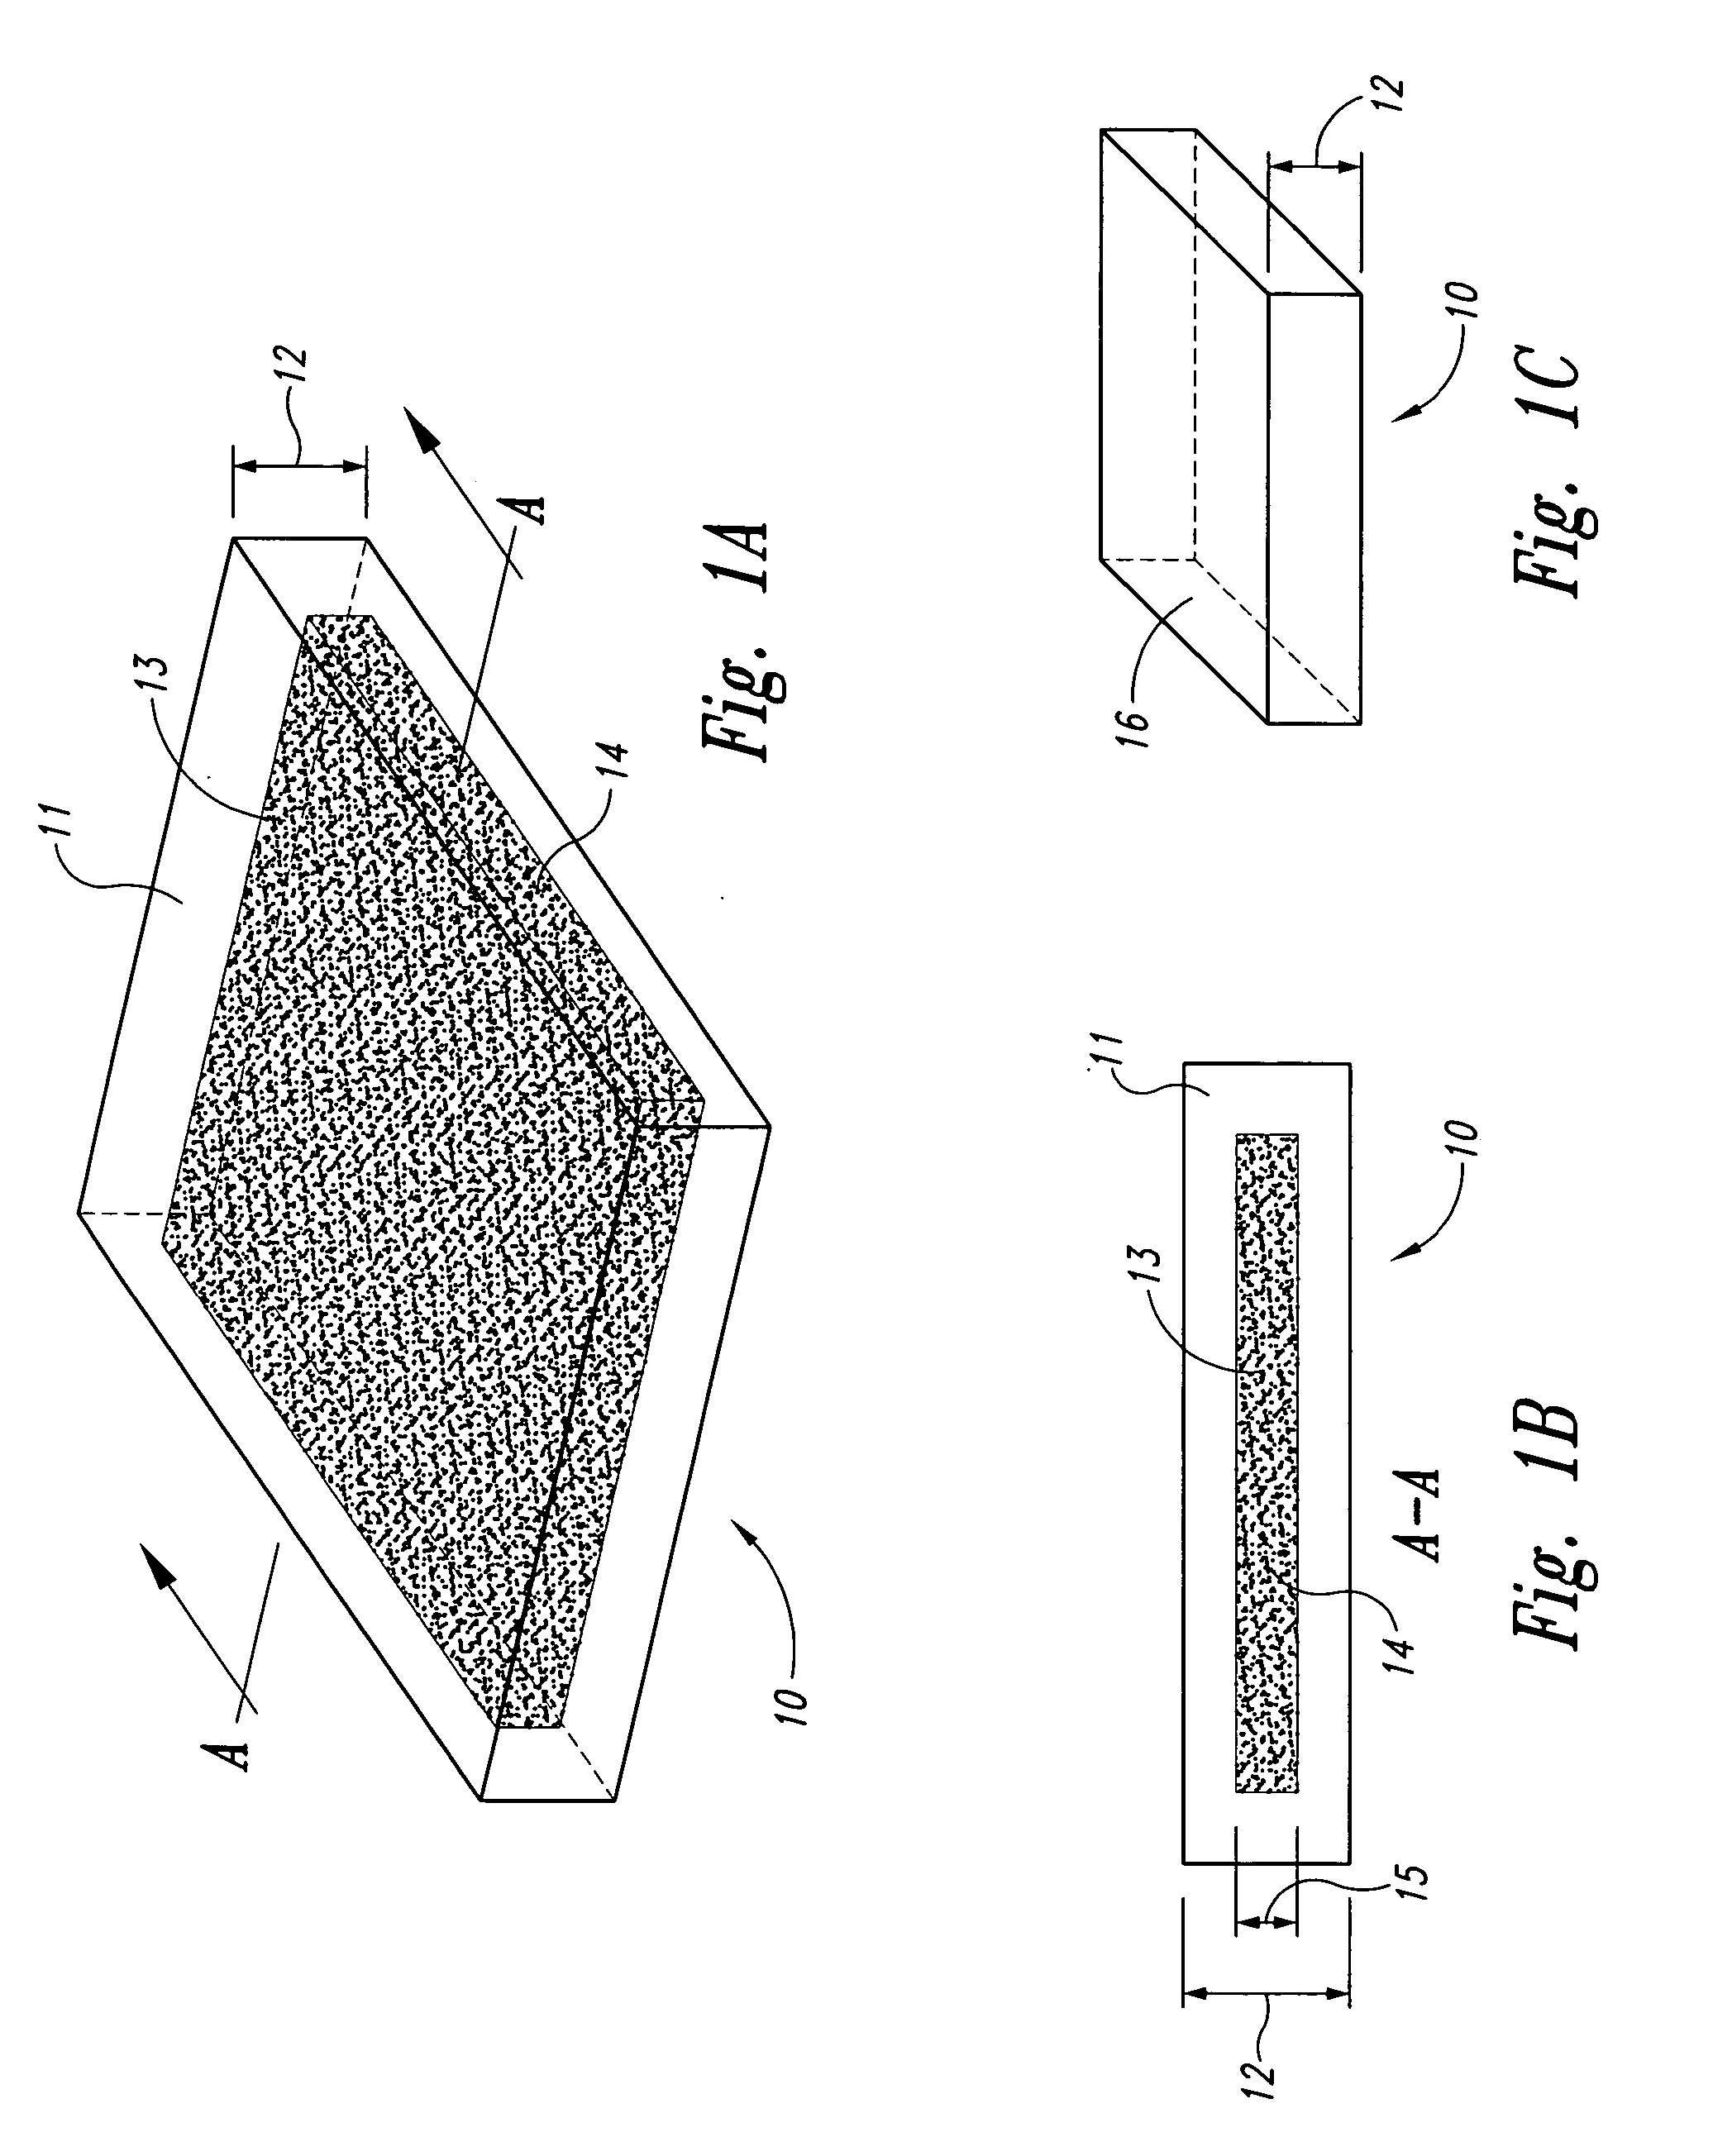 Porosity reference standard for ultrasonic inspection of composite materials